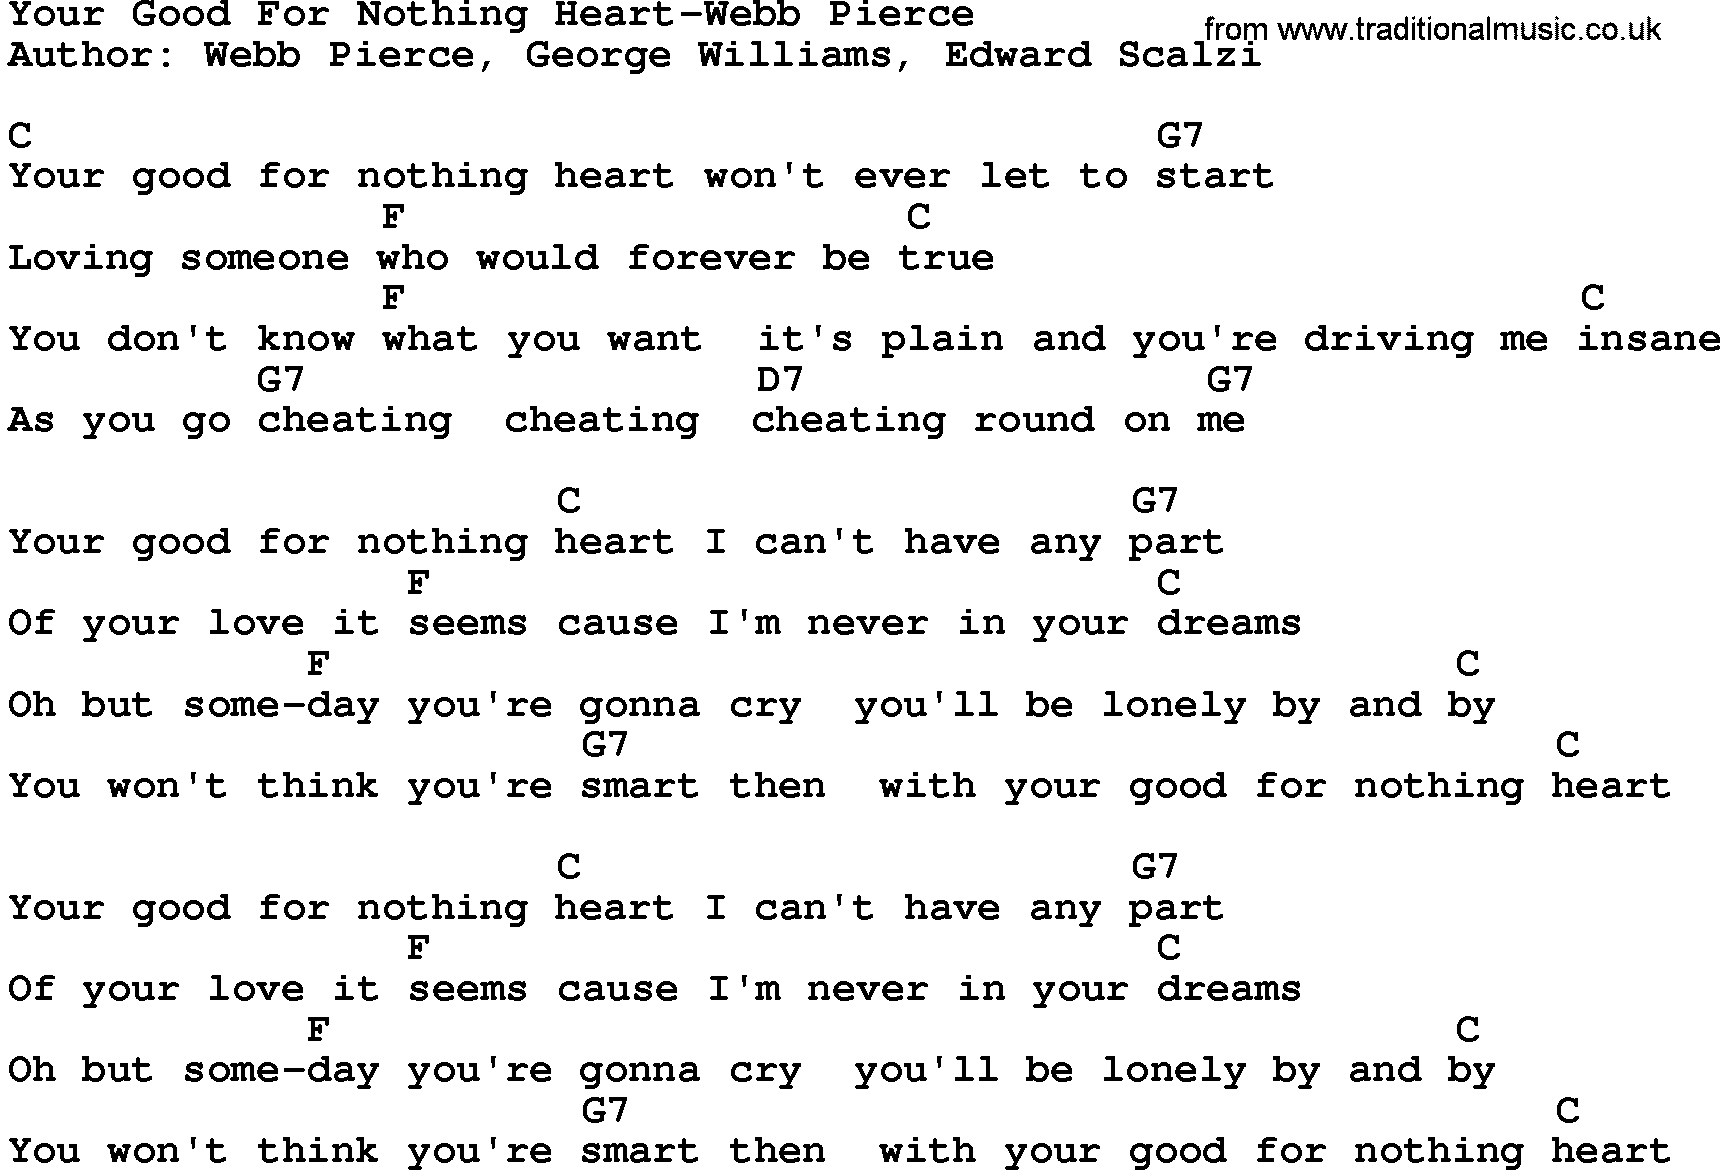 Country music song: Your Good For Nothing Heart-Webb Pierce lyrics and chords